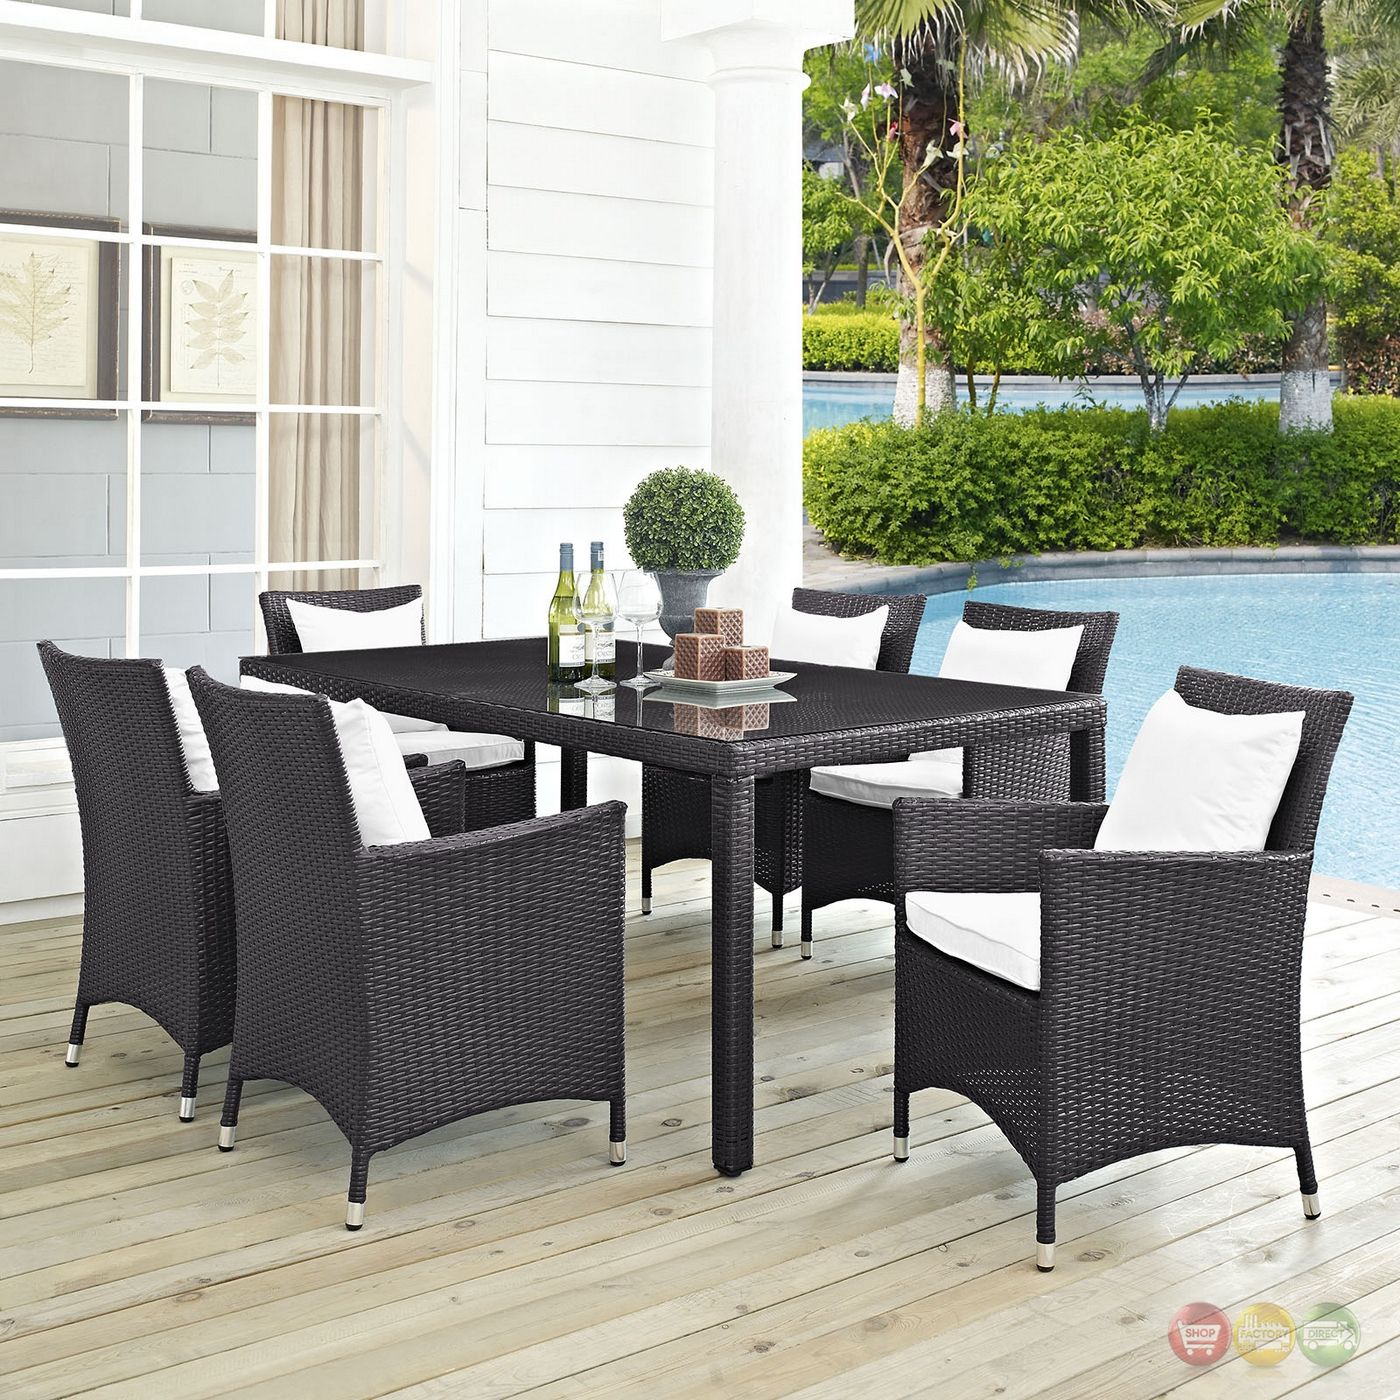 Convene Contemporary 7 Piece Outdoor Patio Glass Top Dining Set Pertaining To White Outdoor Patio Dining Sets (View 6 of 15)